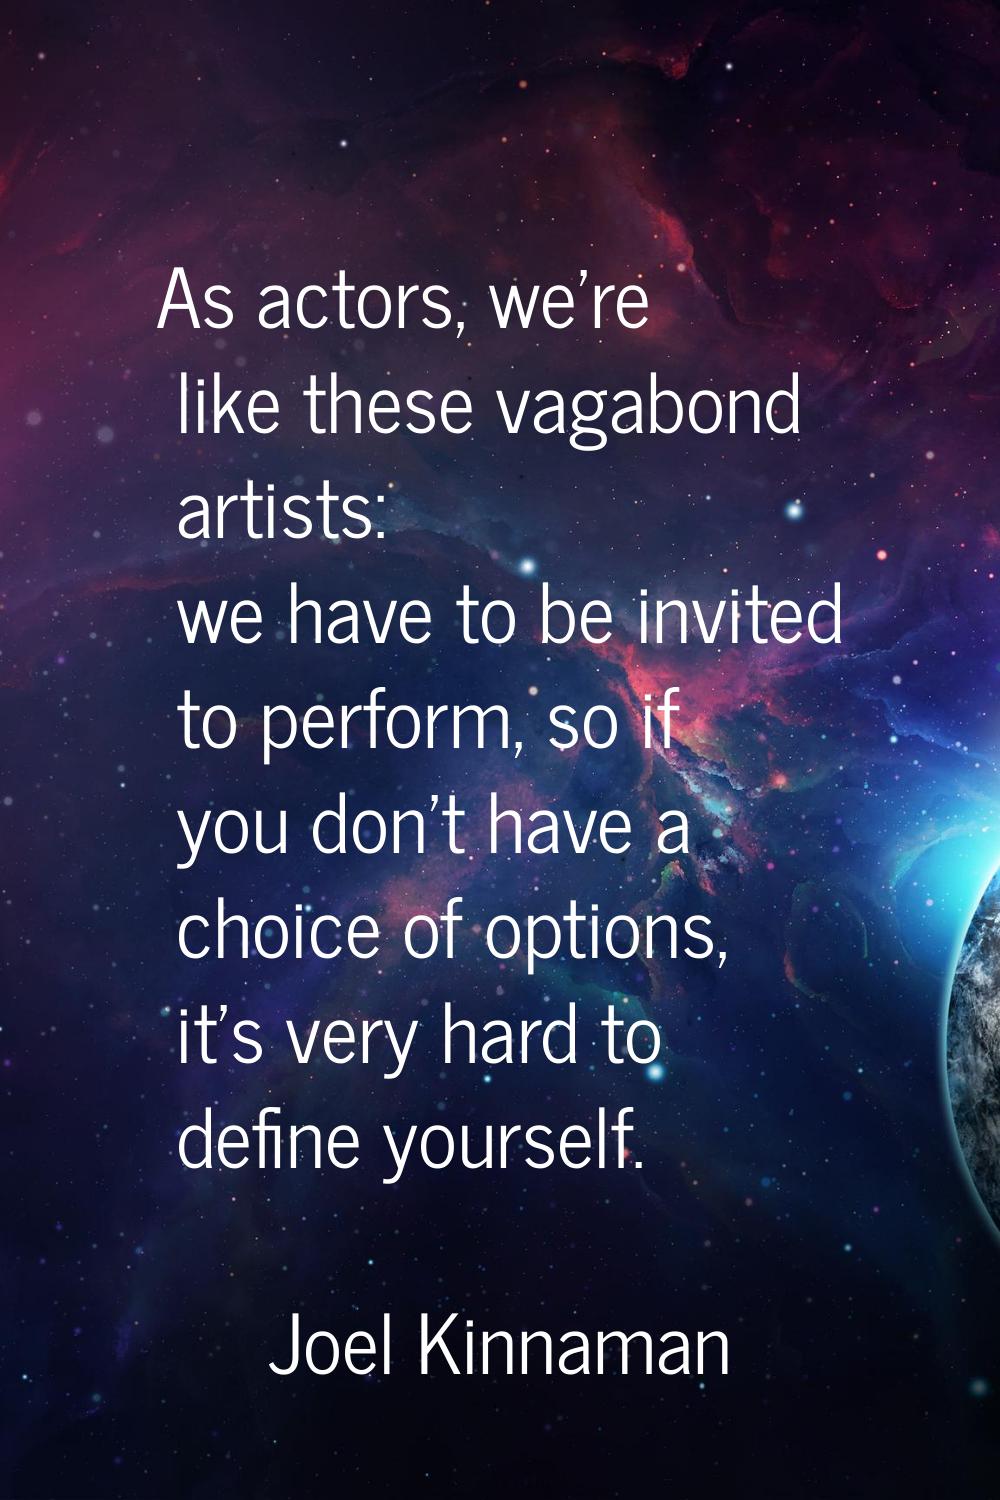 As actors, we're like these vagabond artists: we have to be invited to perform, so if you don't hav